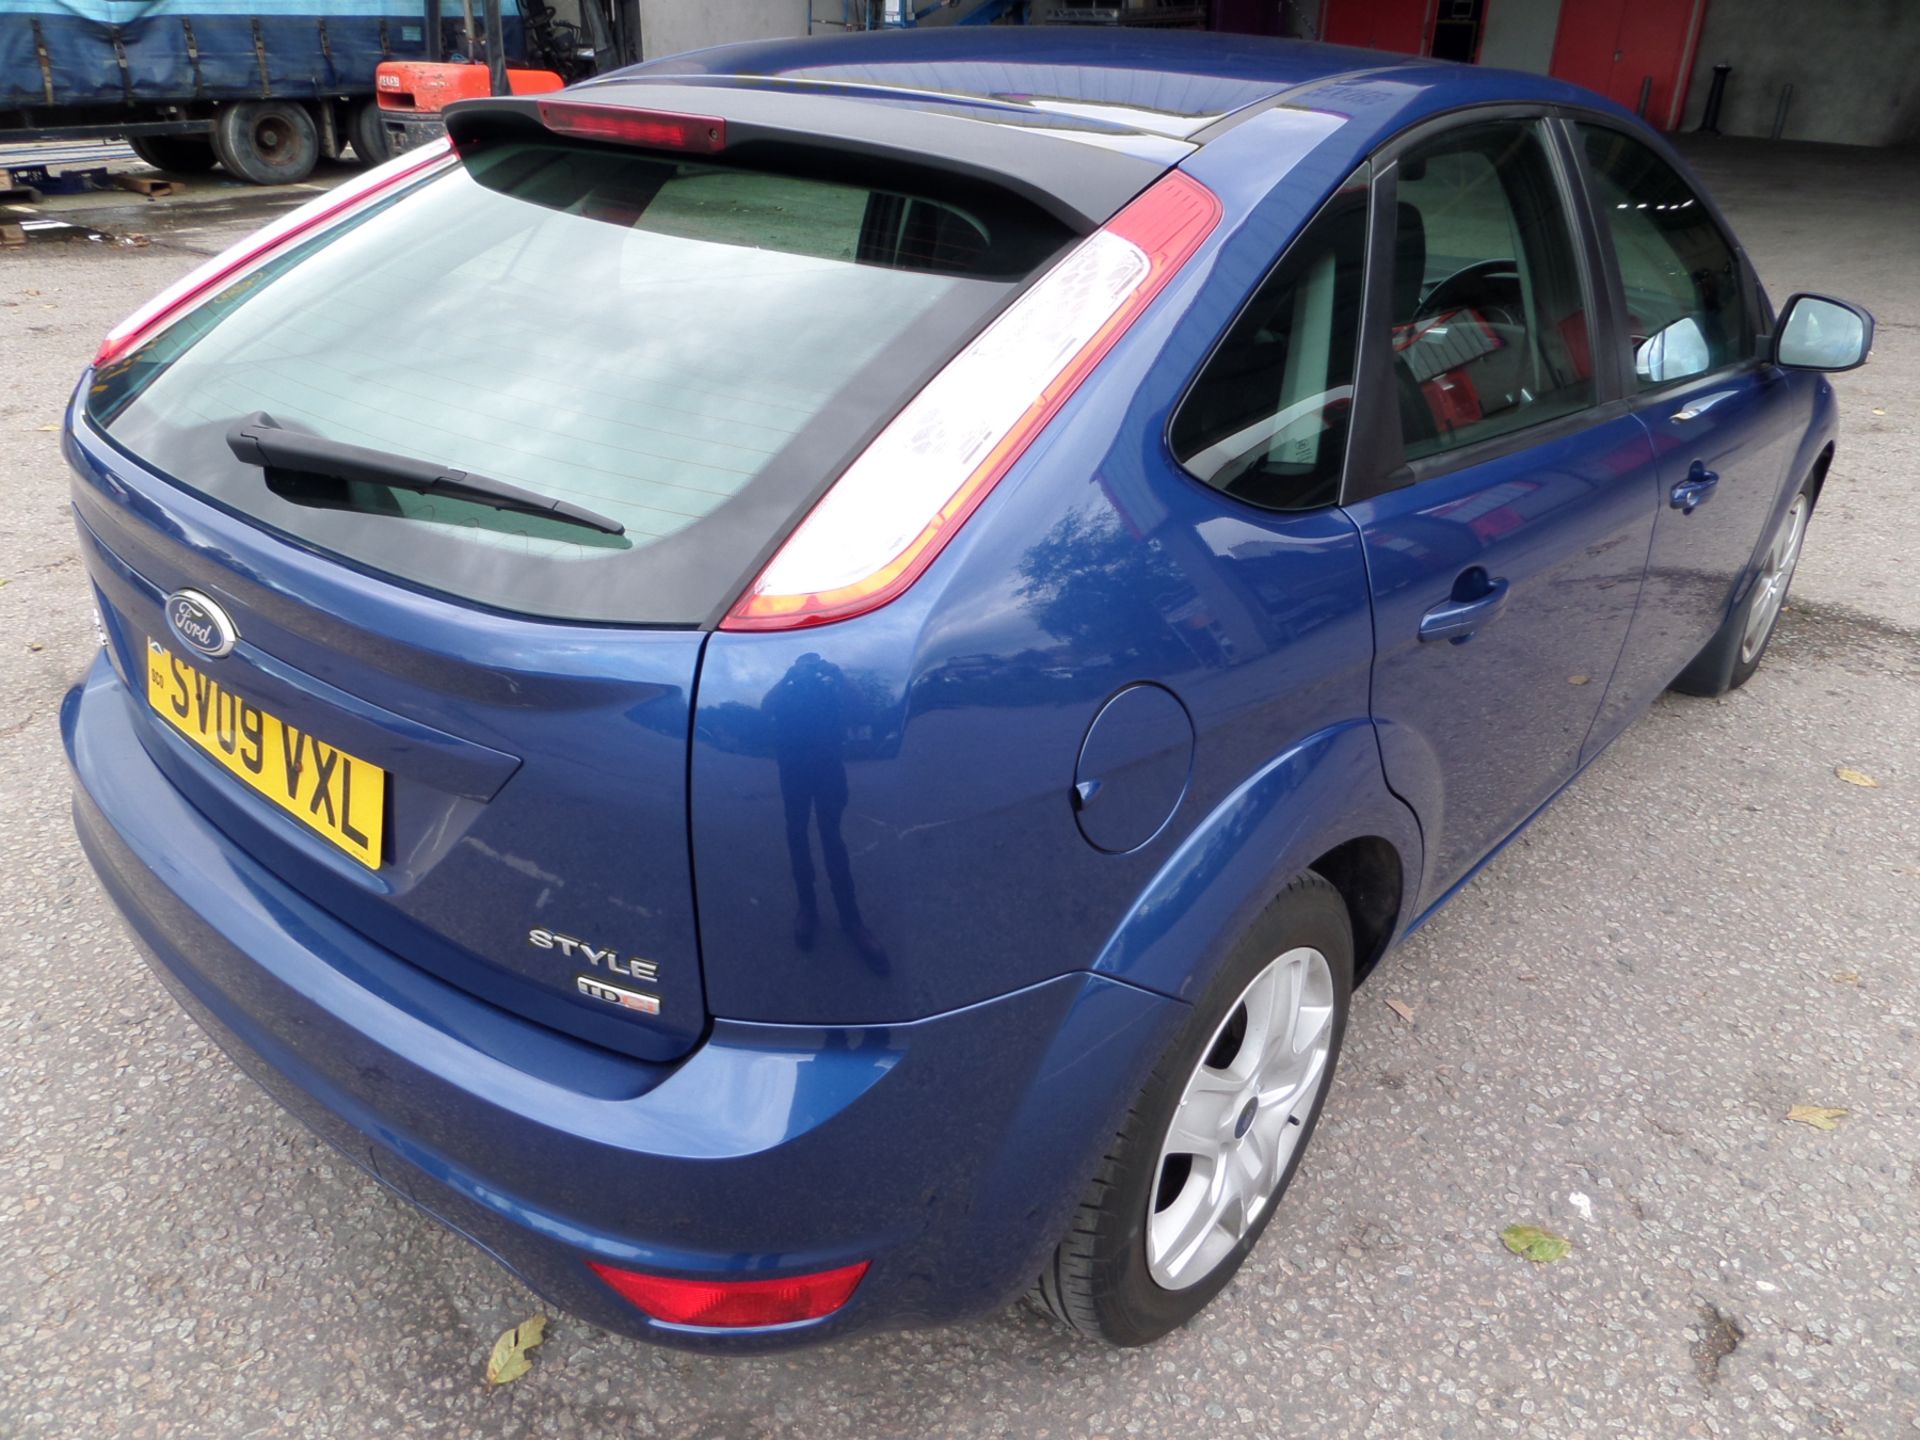 Ford Focus Style Td 115 - 1753cc 5 Door - Image 6 of 11